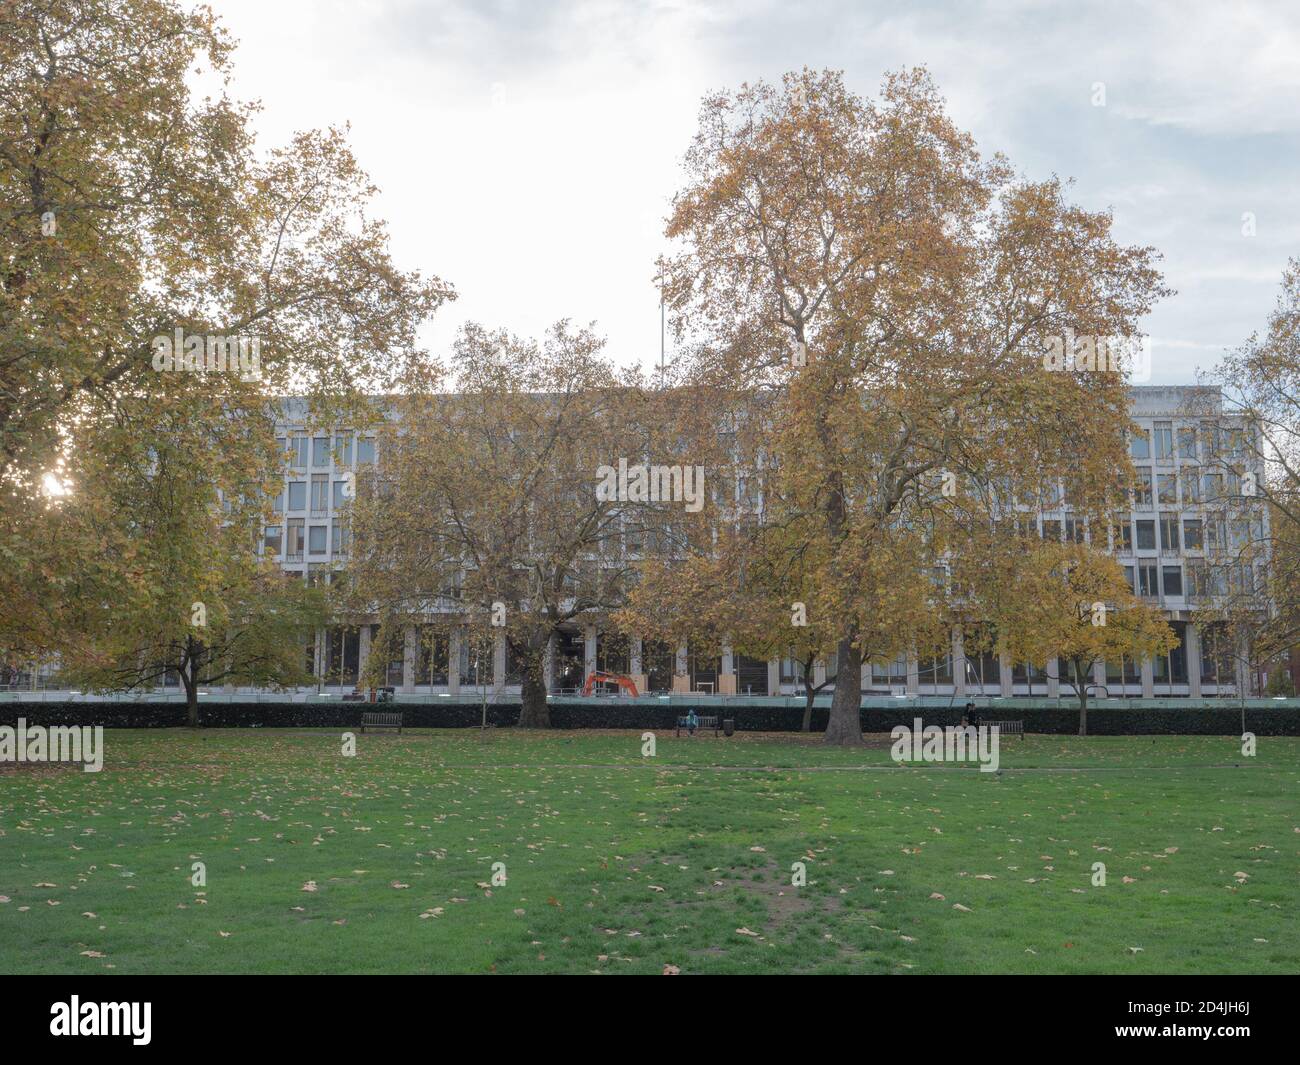 Trees covered in yellow autumn colored leaves seen in central london against the background of  a building on Grosvenor Square. Stock Photo